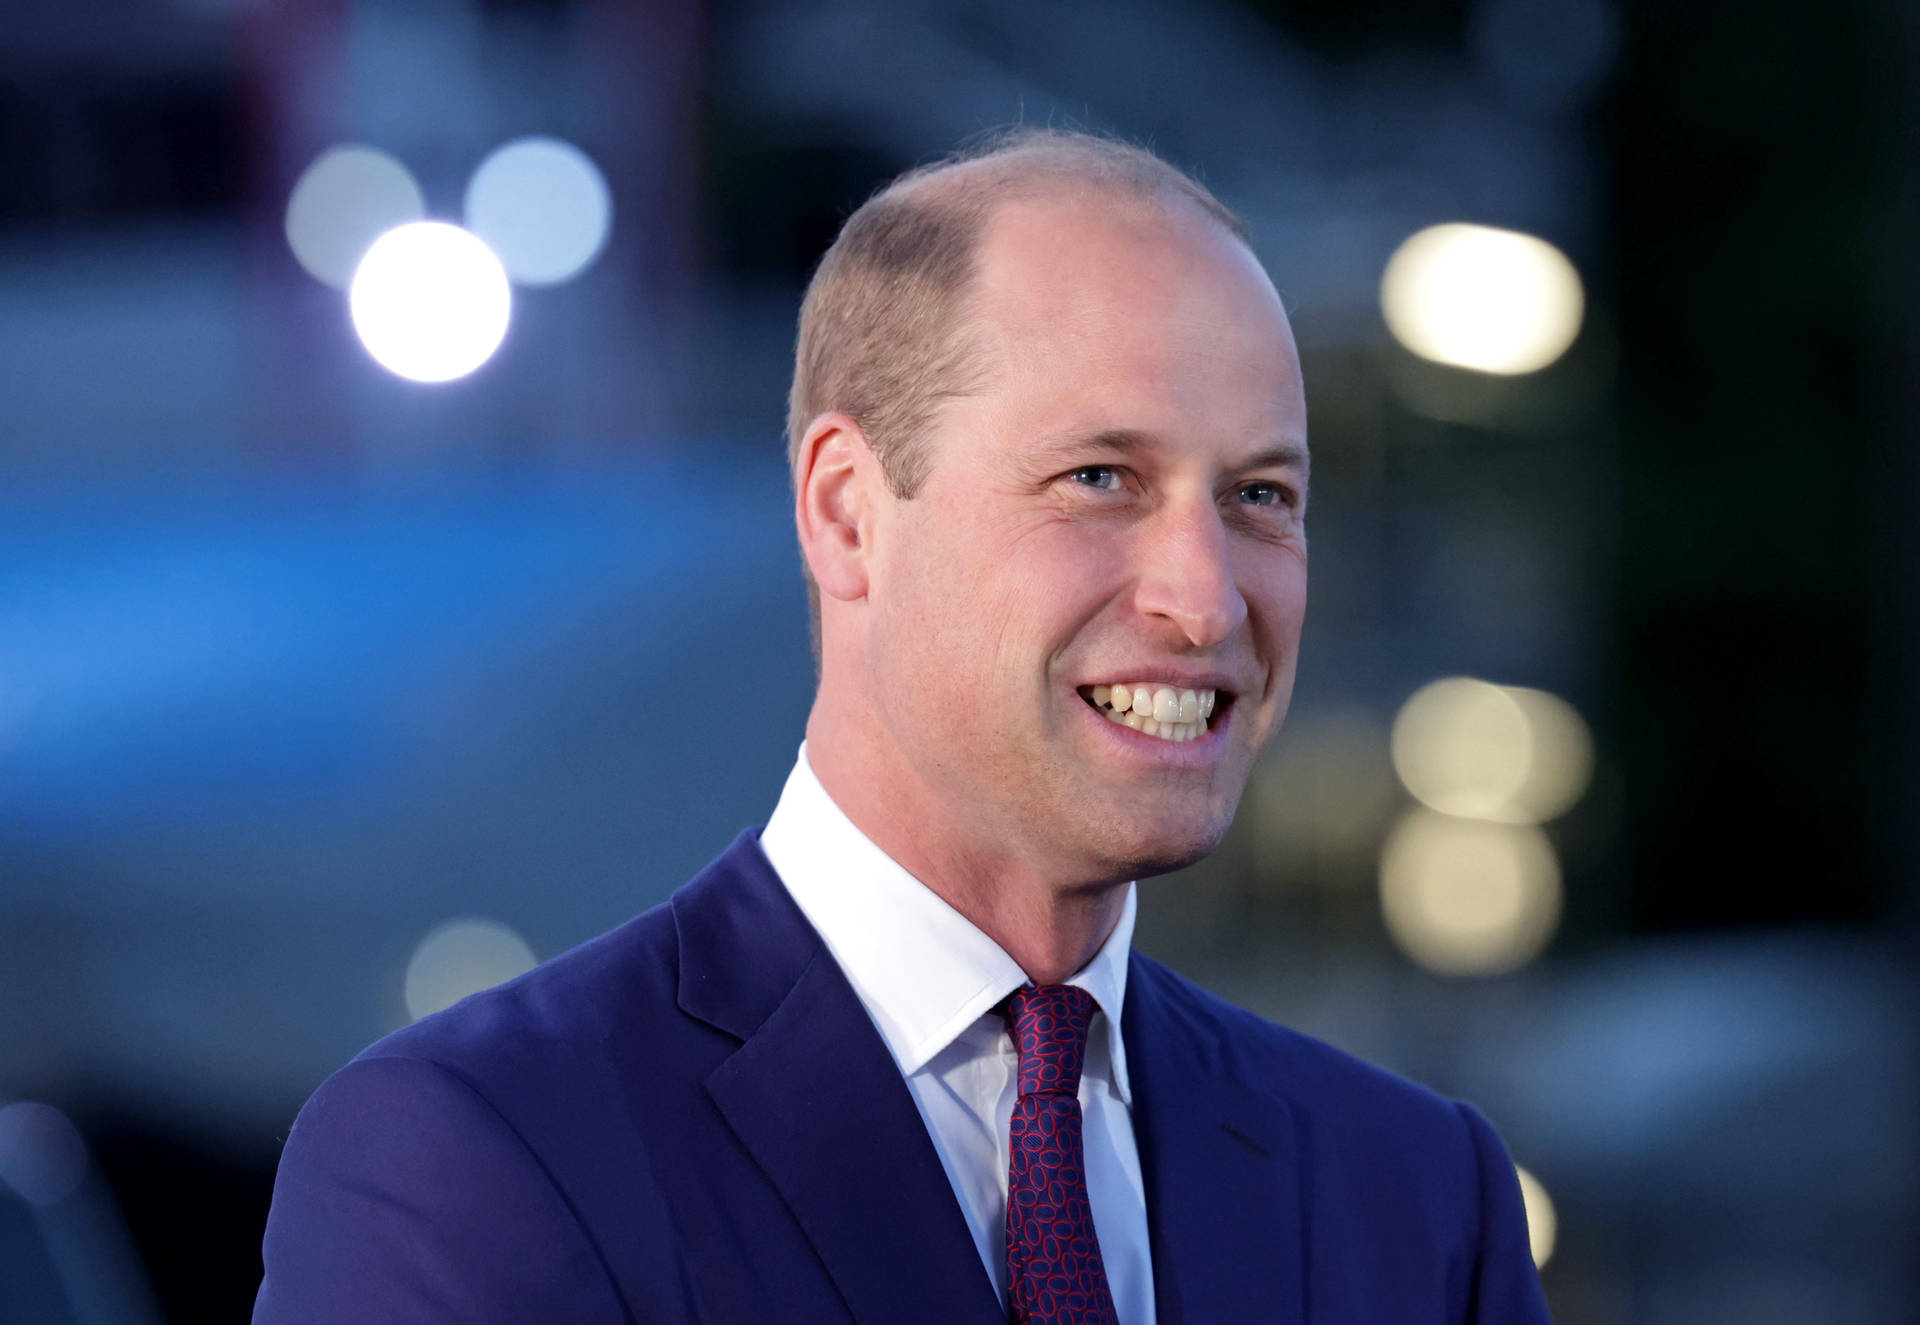 Prince William Smiling Wide Wallpaper